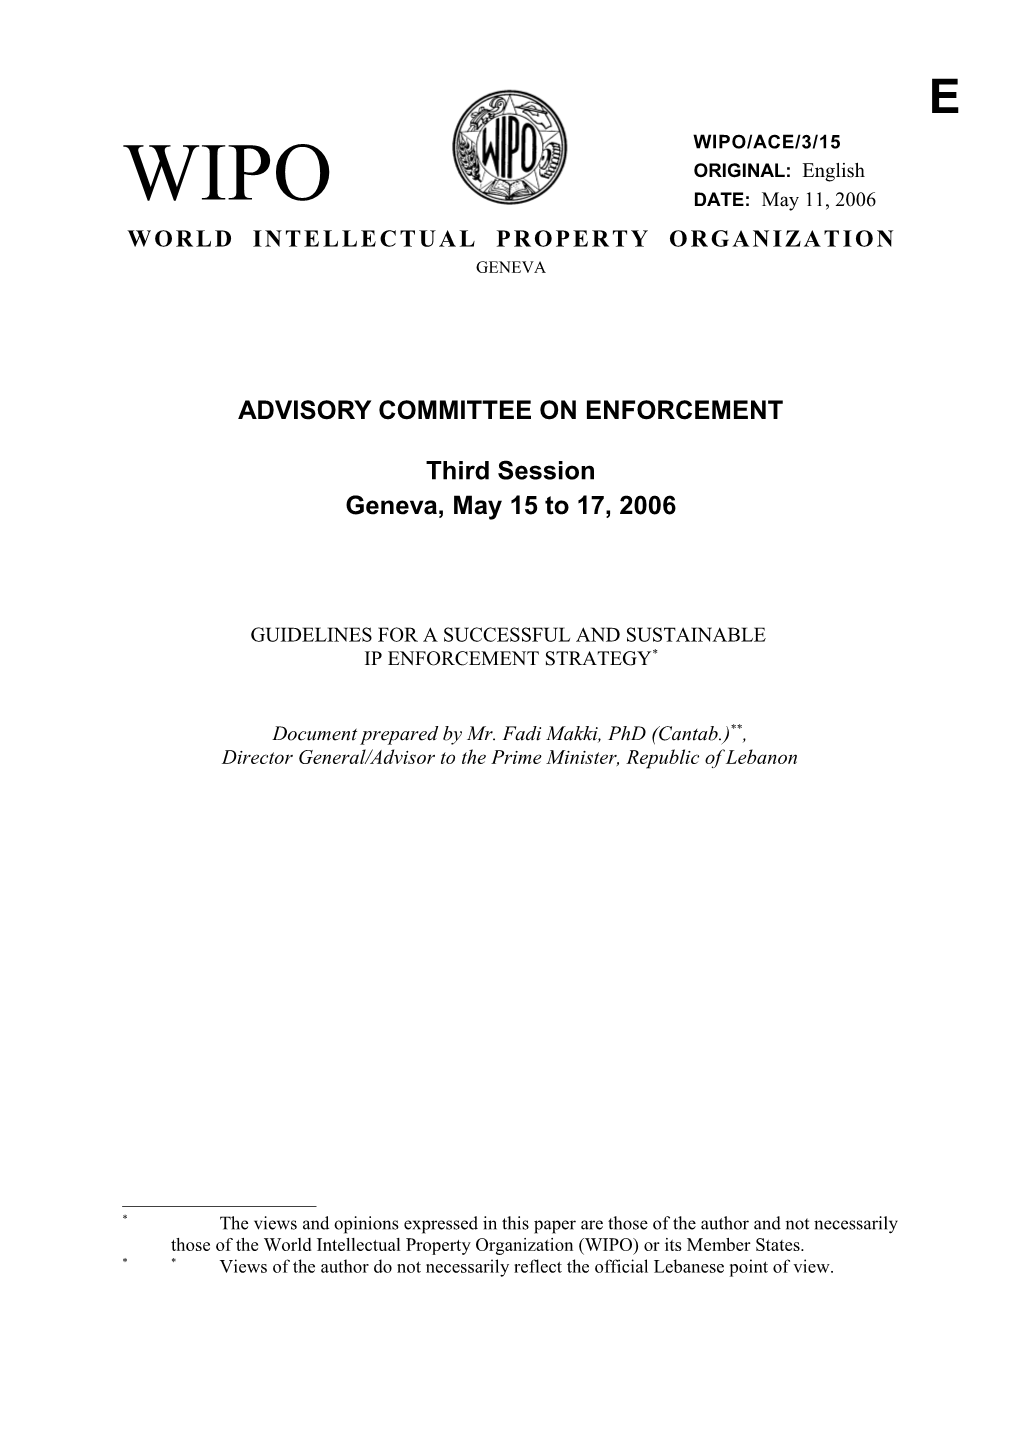 WIPO/ACE/3/15: Guidelines for a Successful and Sustainable IP Enforcement Strategy